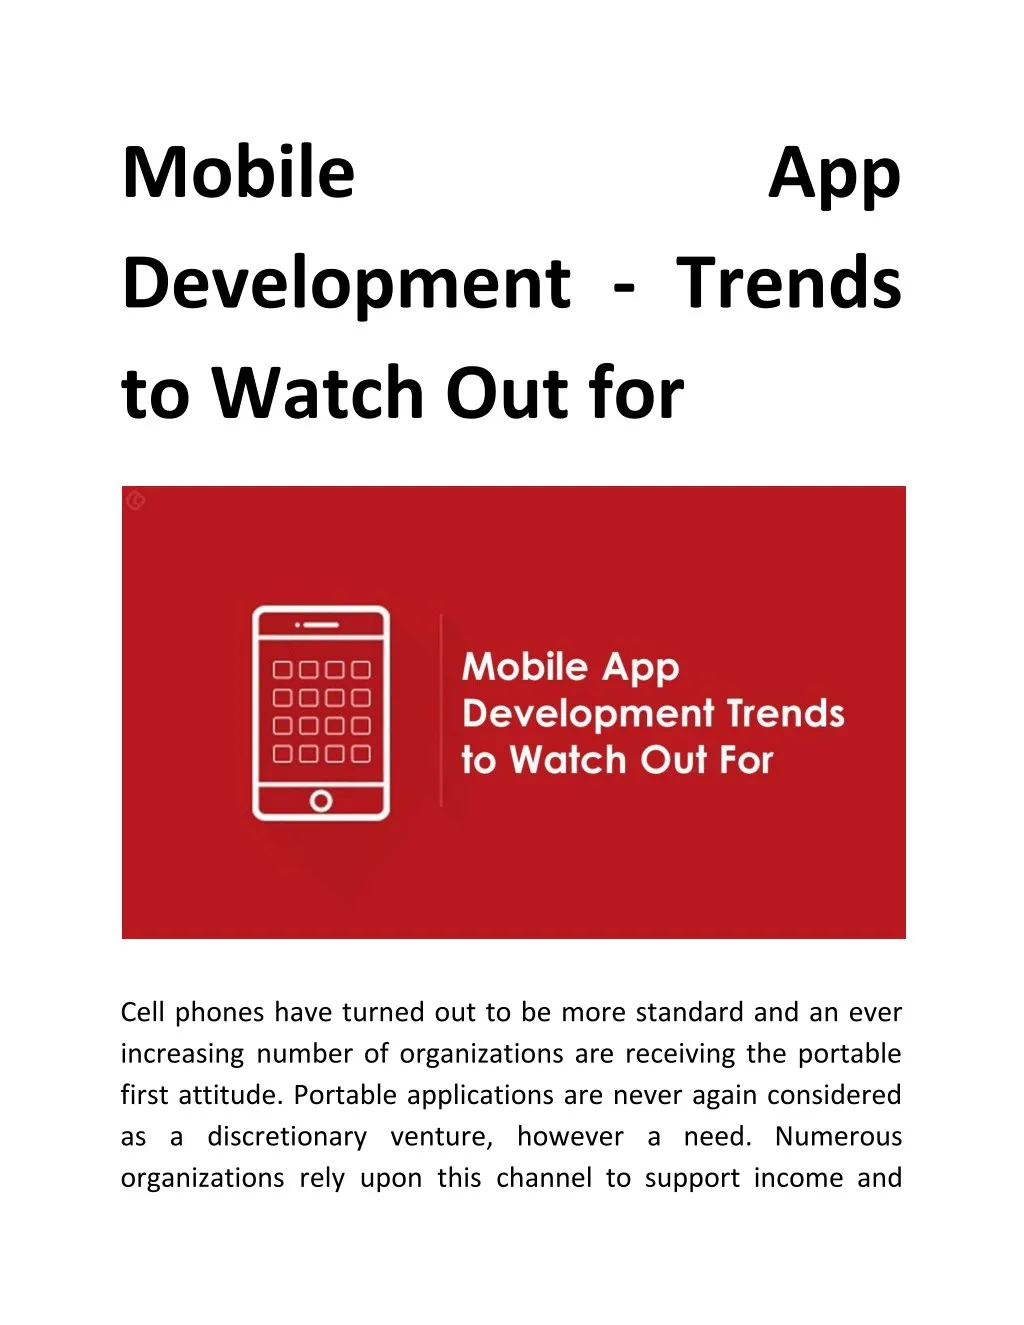 mobile development trends to watch out for